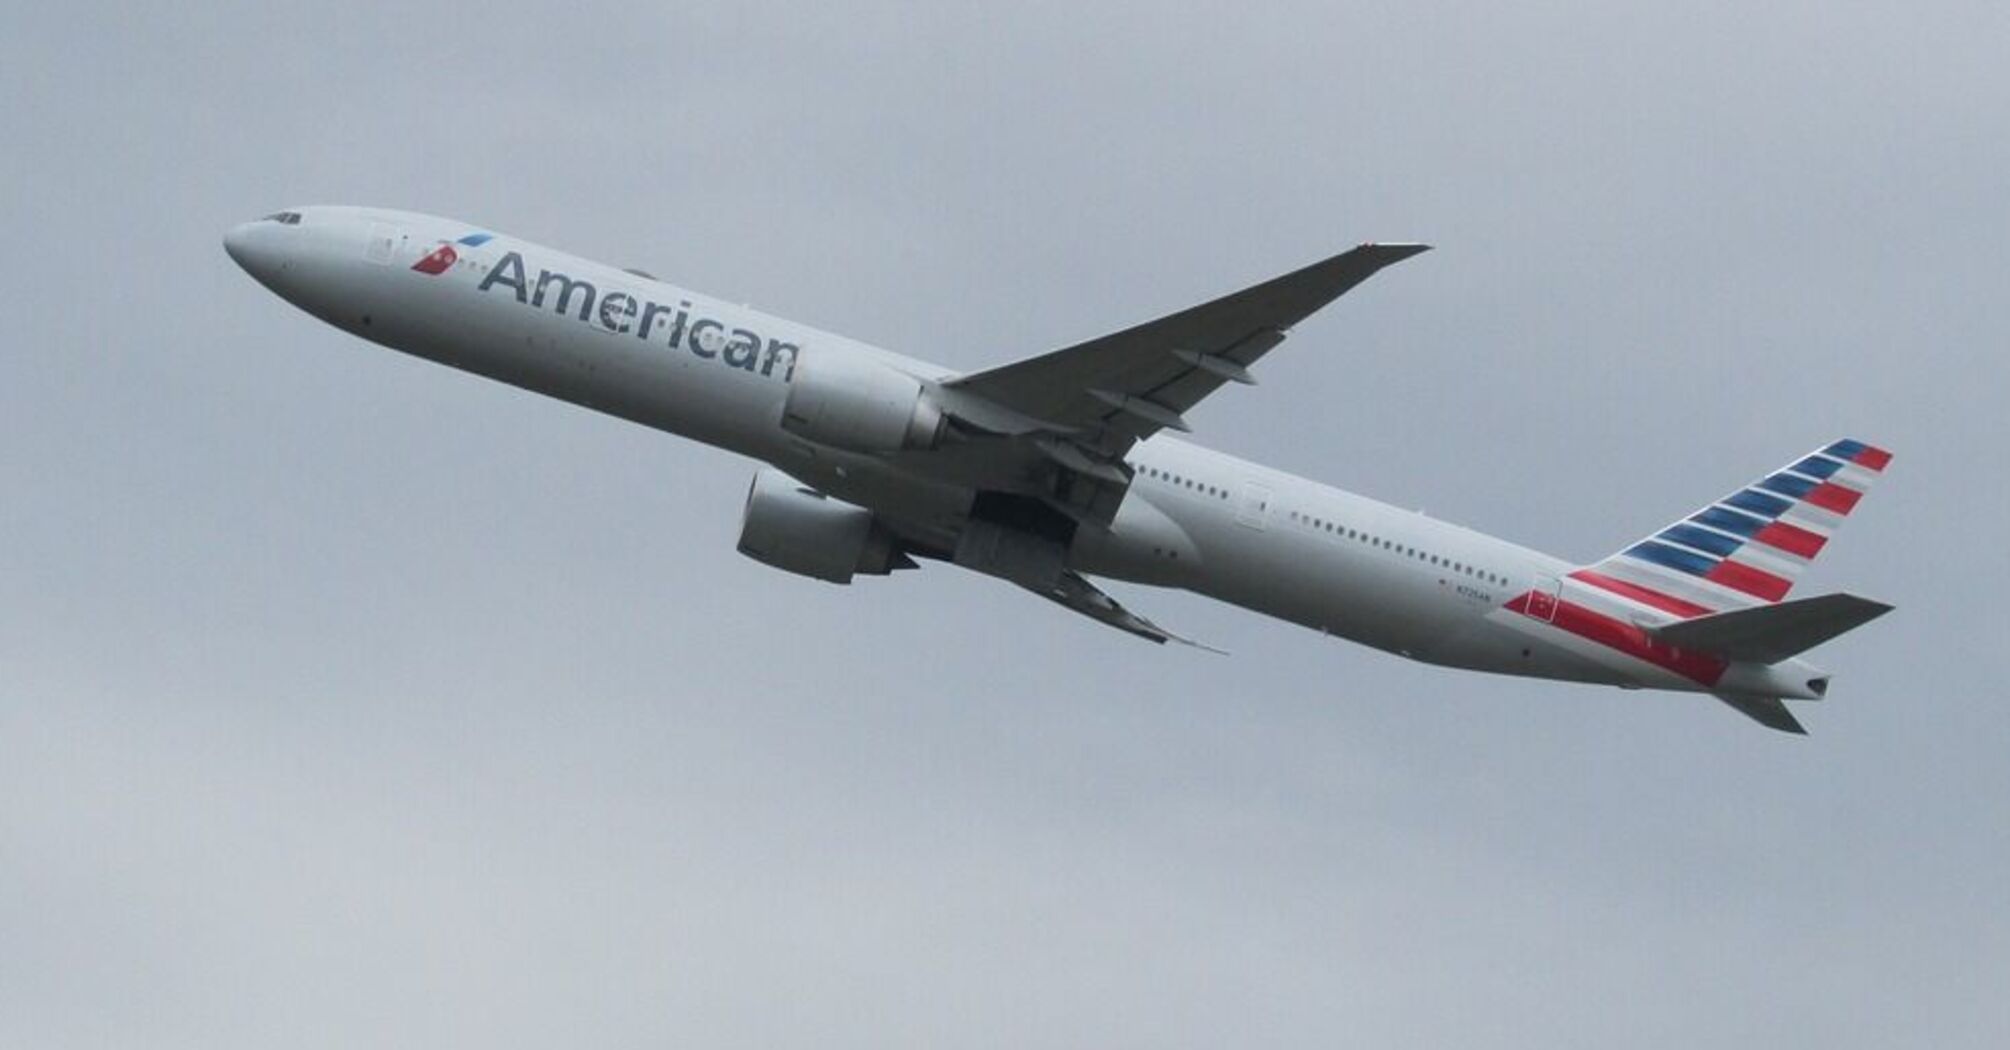 American Airlines adds nonstop service to another resort in the Bahamas